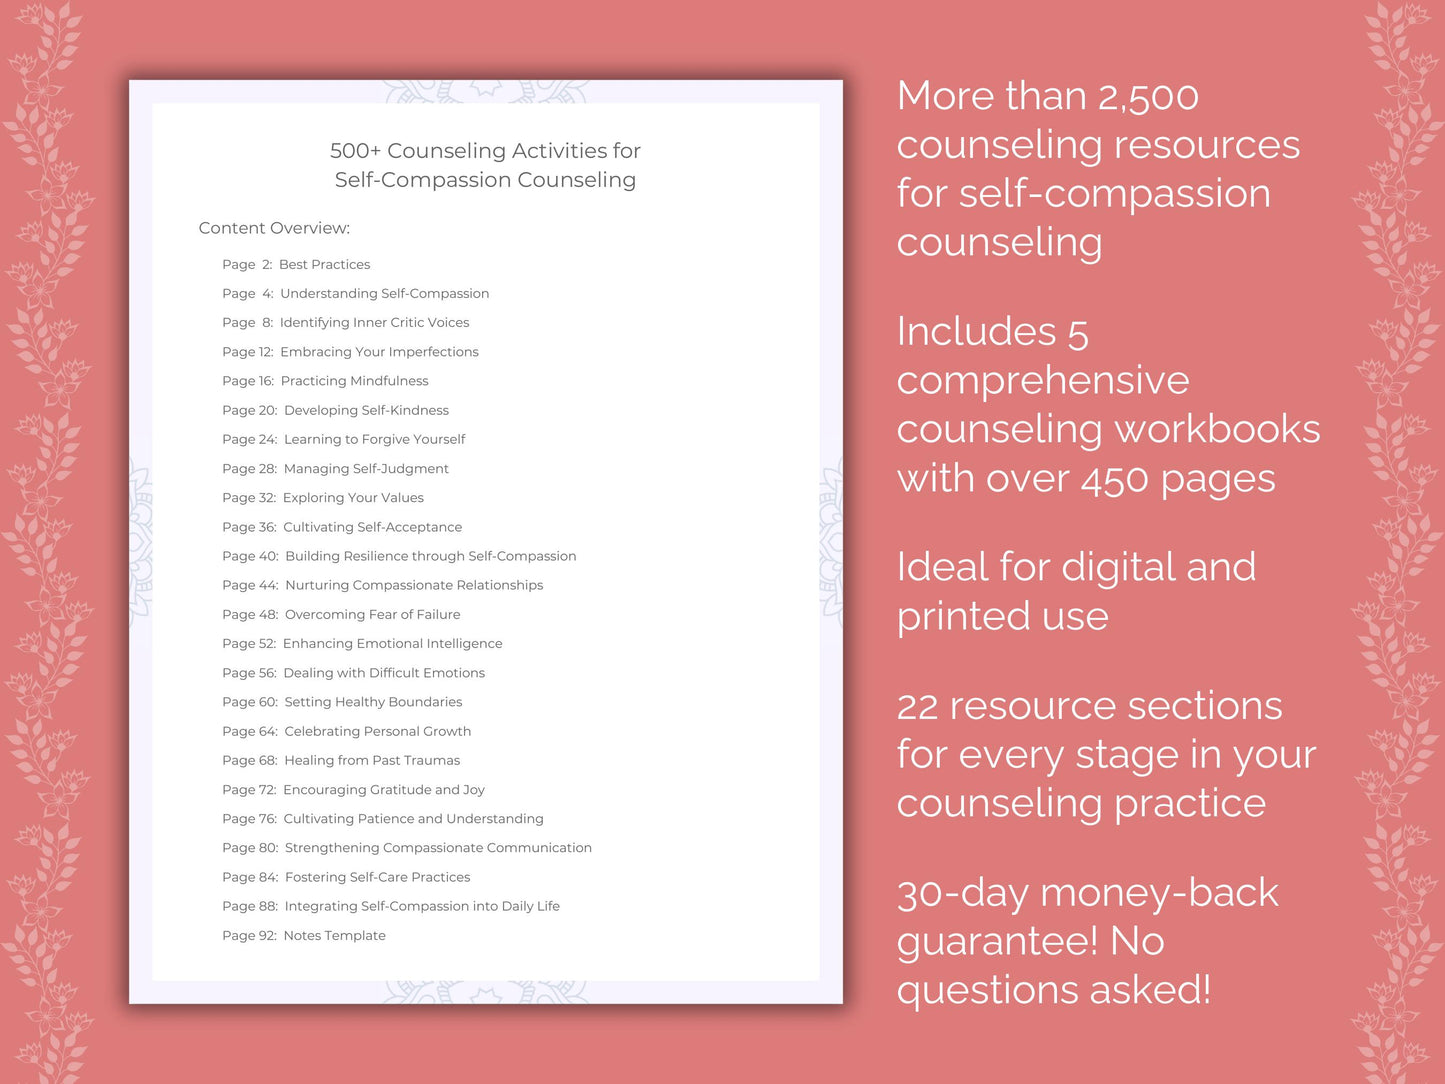 Self-Compassion Tool, Template, Counselor, Self-Compassion, Counseling, Mental Health, Workbook, Worksheet, Resource, Therapy, Therapist, Self-Compassion Idea, Content